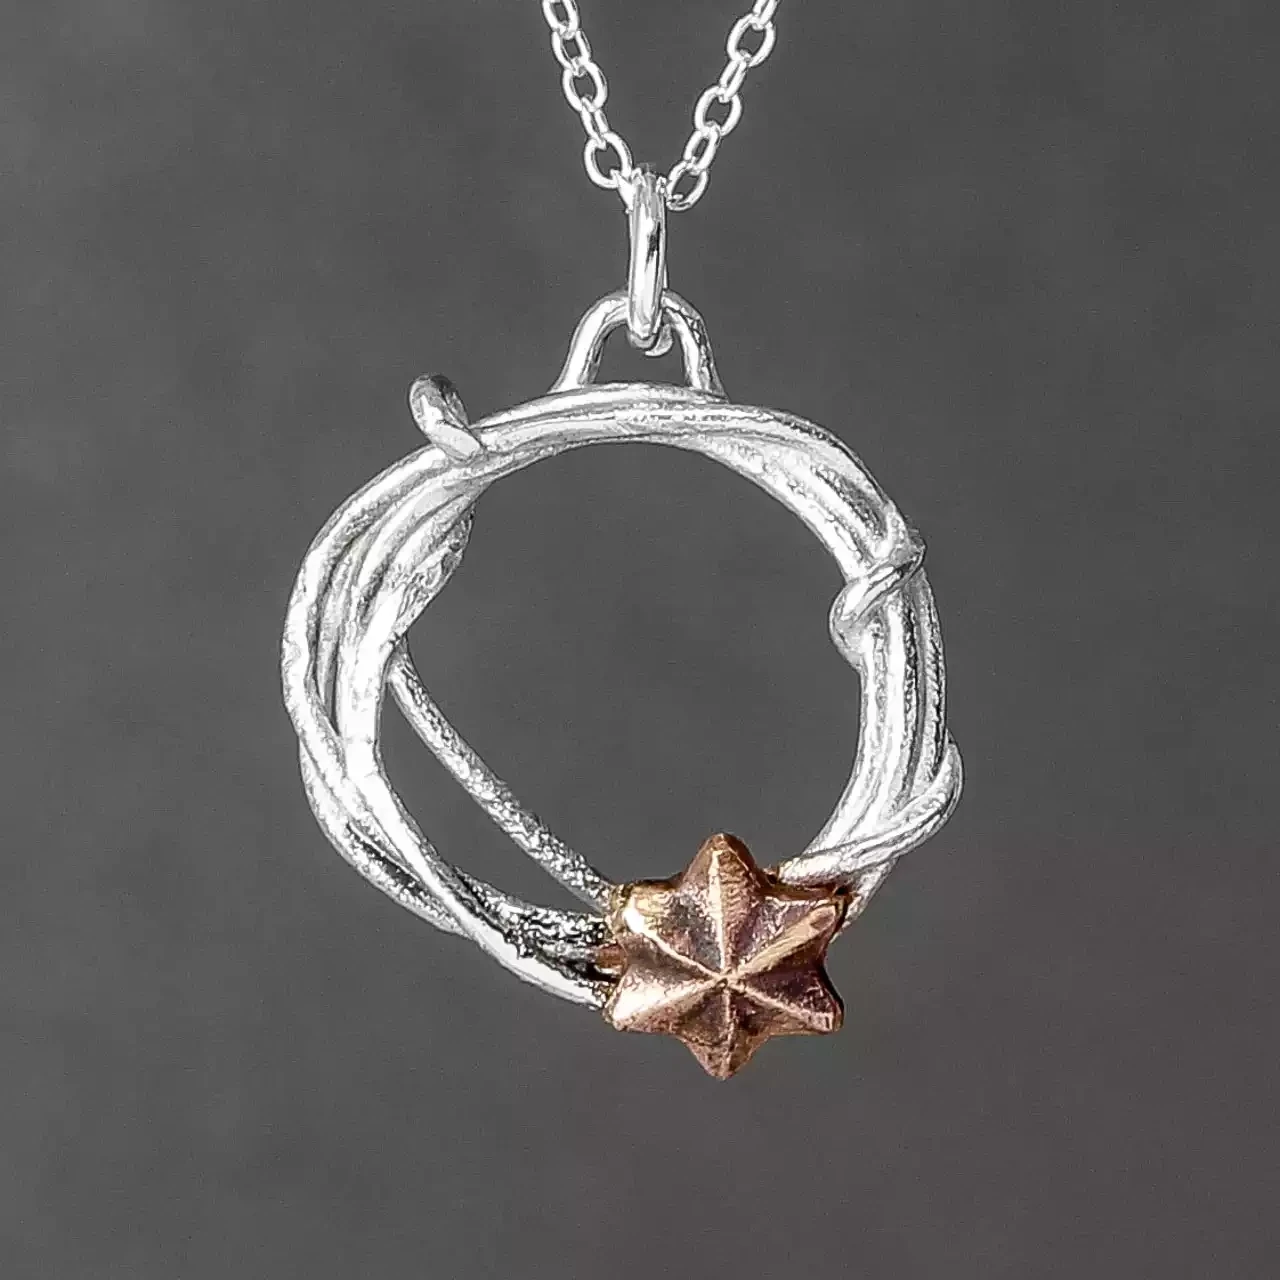 Star Silver and Bronze Pendant by Xuella Arnold